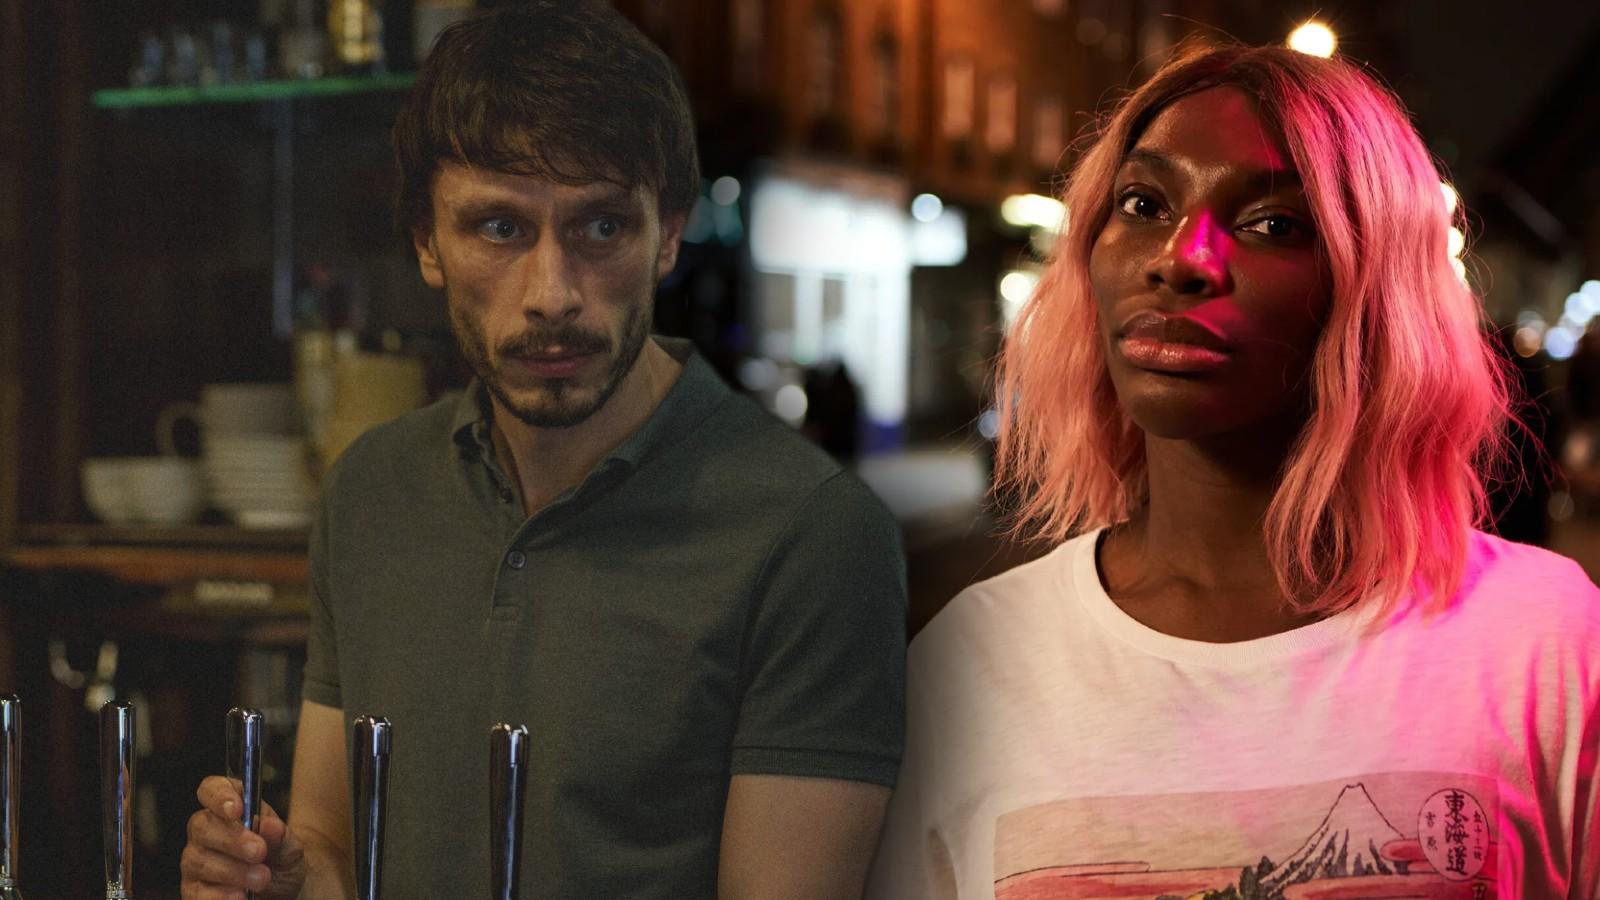 Richard Gadd in Baby Reindeer and Michaela Coel in I May Destroy You